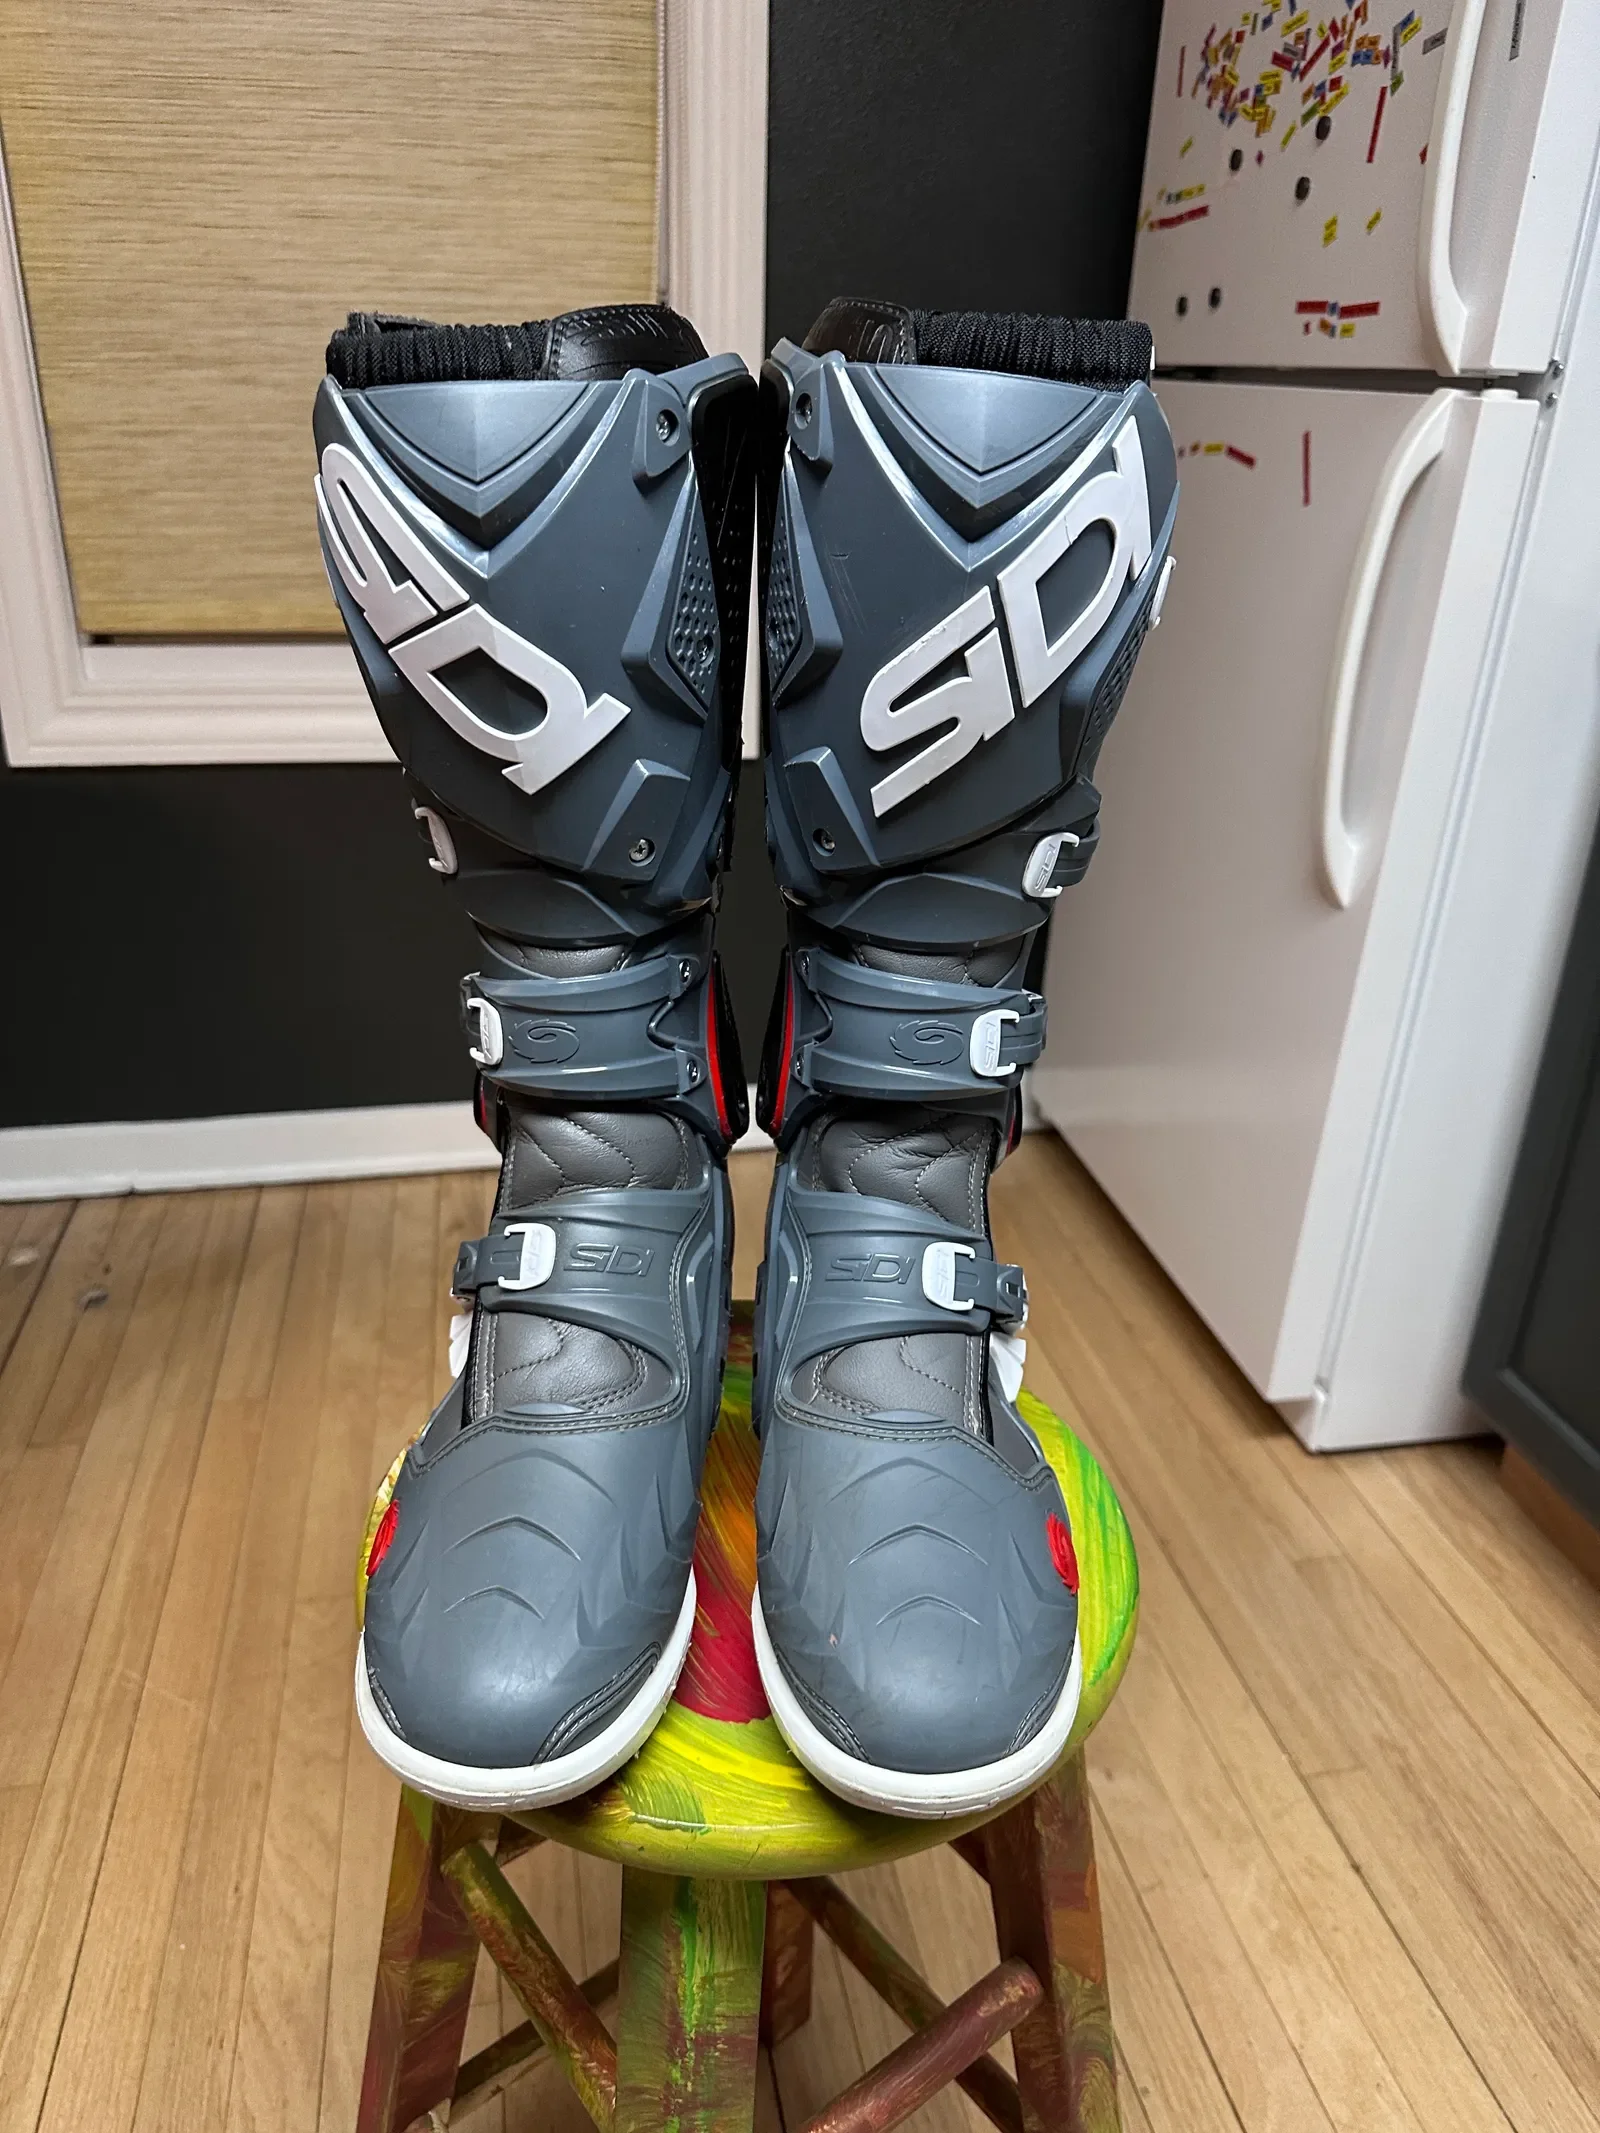 Sidi Crossfire 2 Srs Boots $200 Excellent Condition Only Used 3 Times